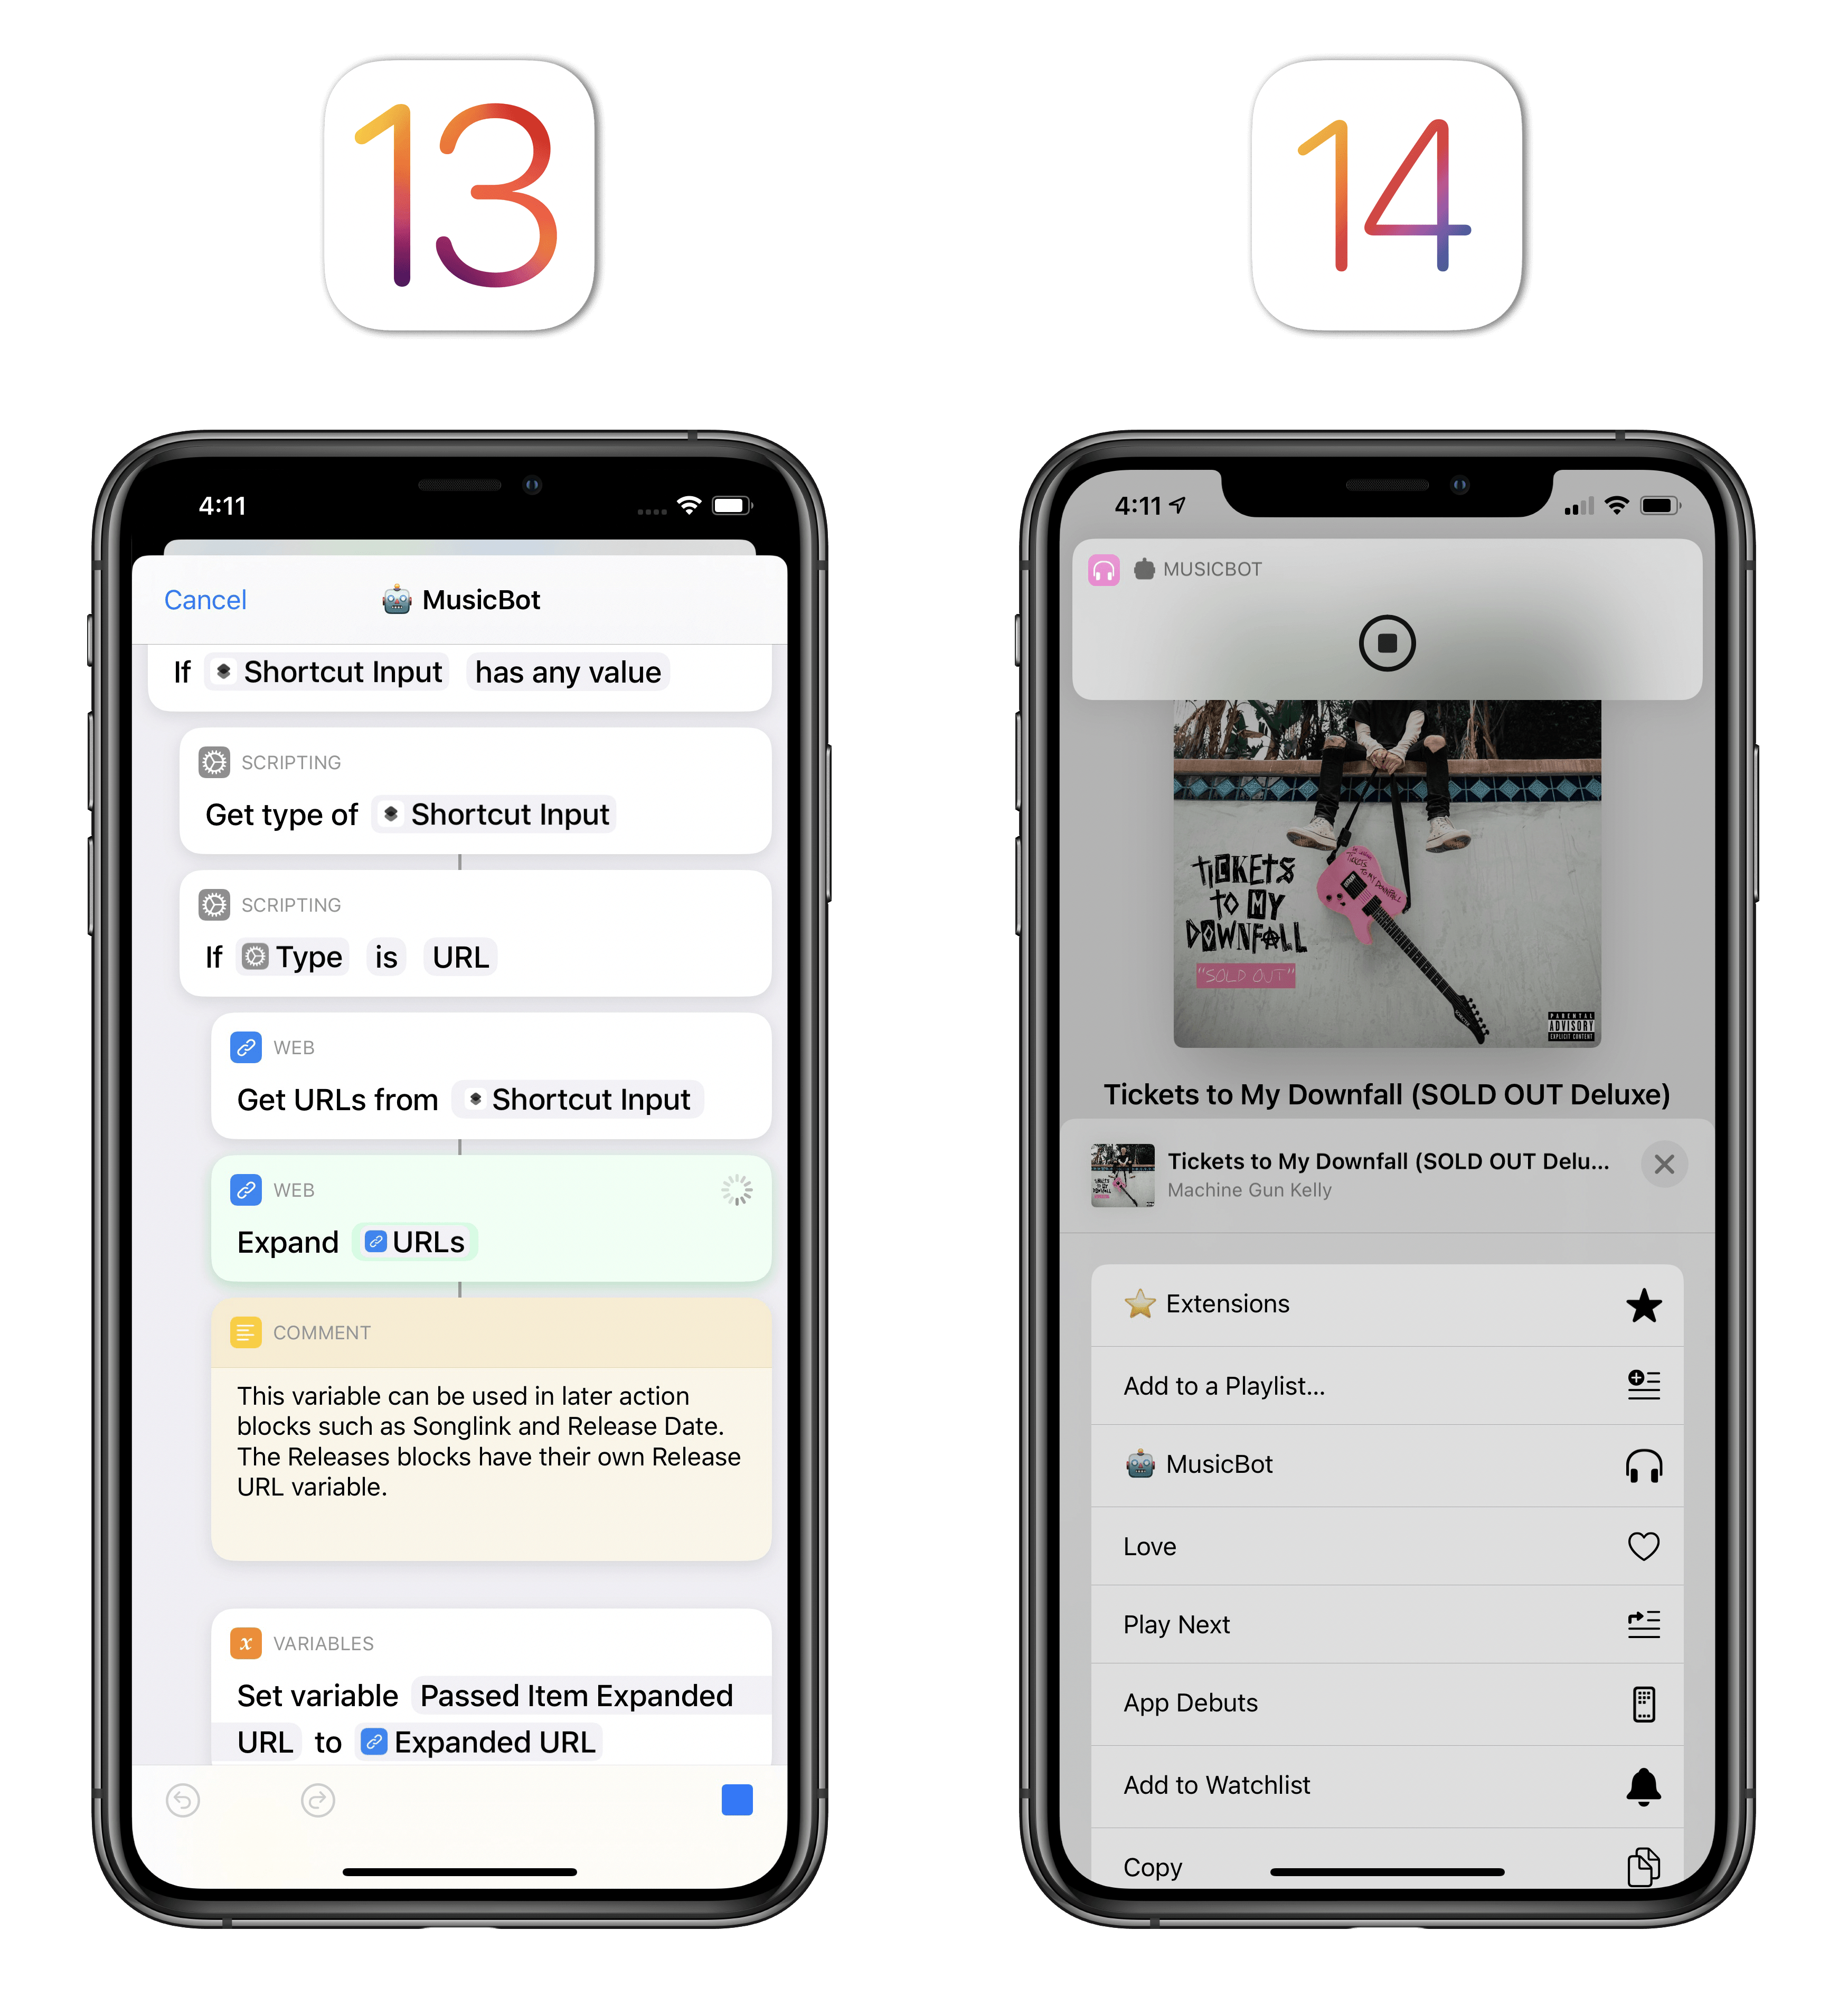 When you started running a shortcut from the share sheet in iOS 13, you'd see the editor and the entire flow of actions from top to bottom. In iOS 14, you only see a compact confirmation banner at the top.